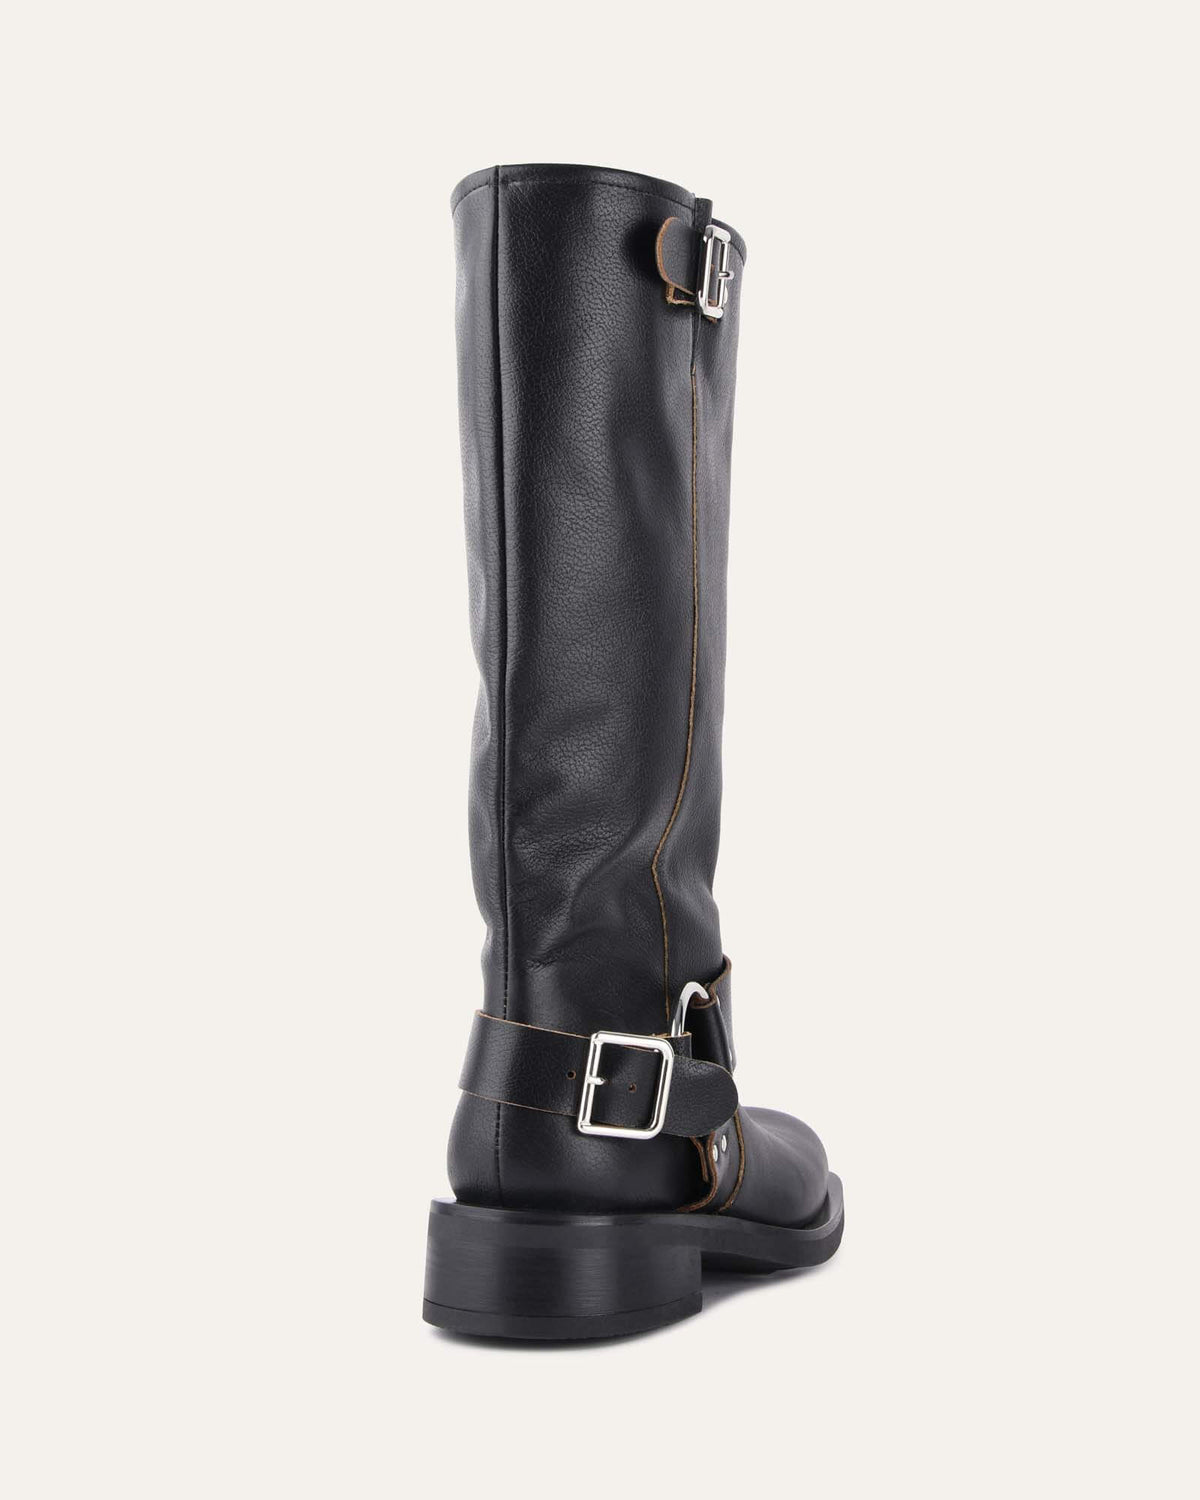 ROCCO CALF BOOTS BLACK LEATHER